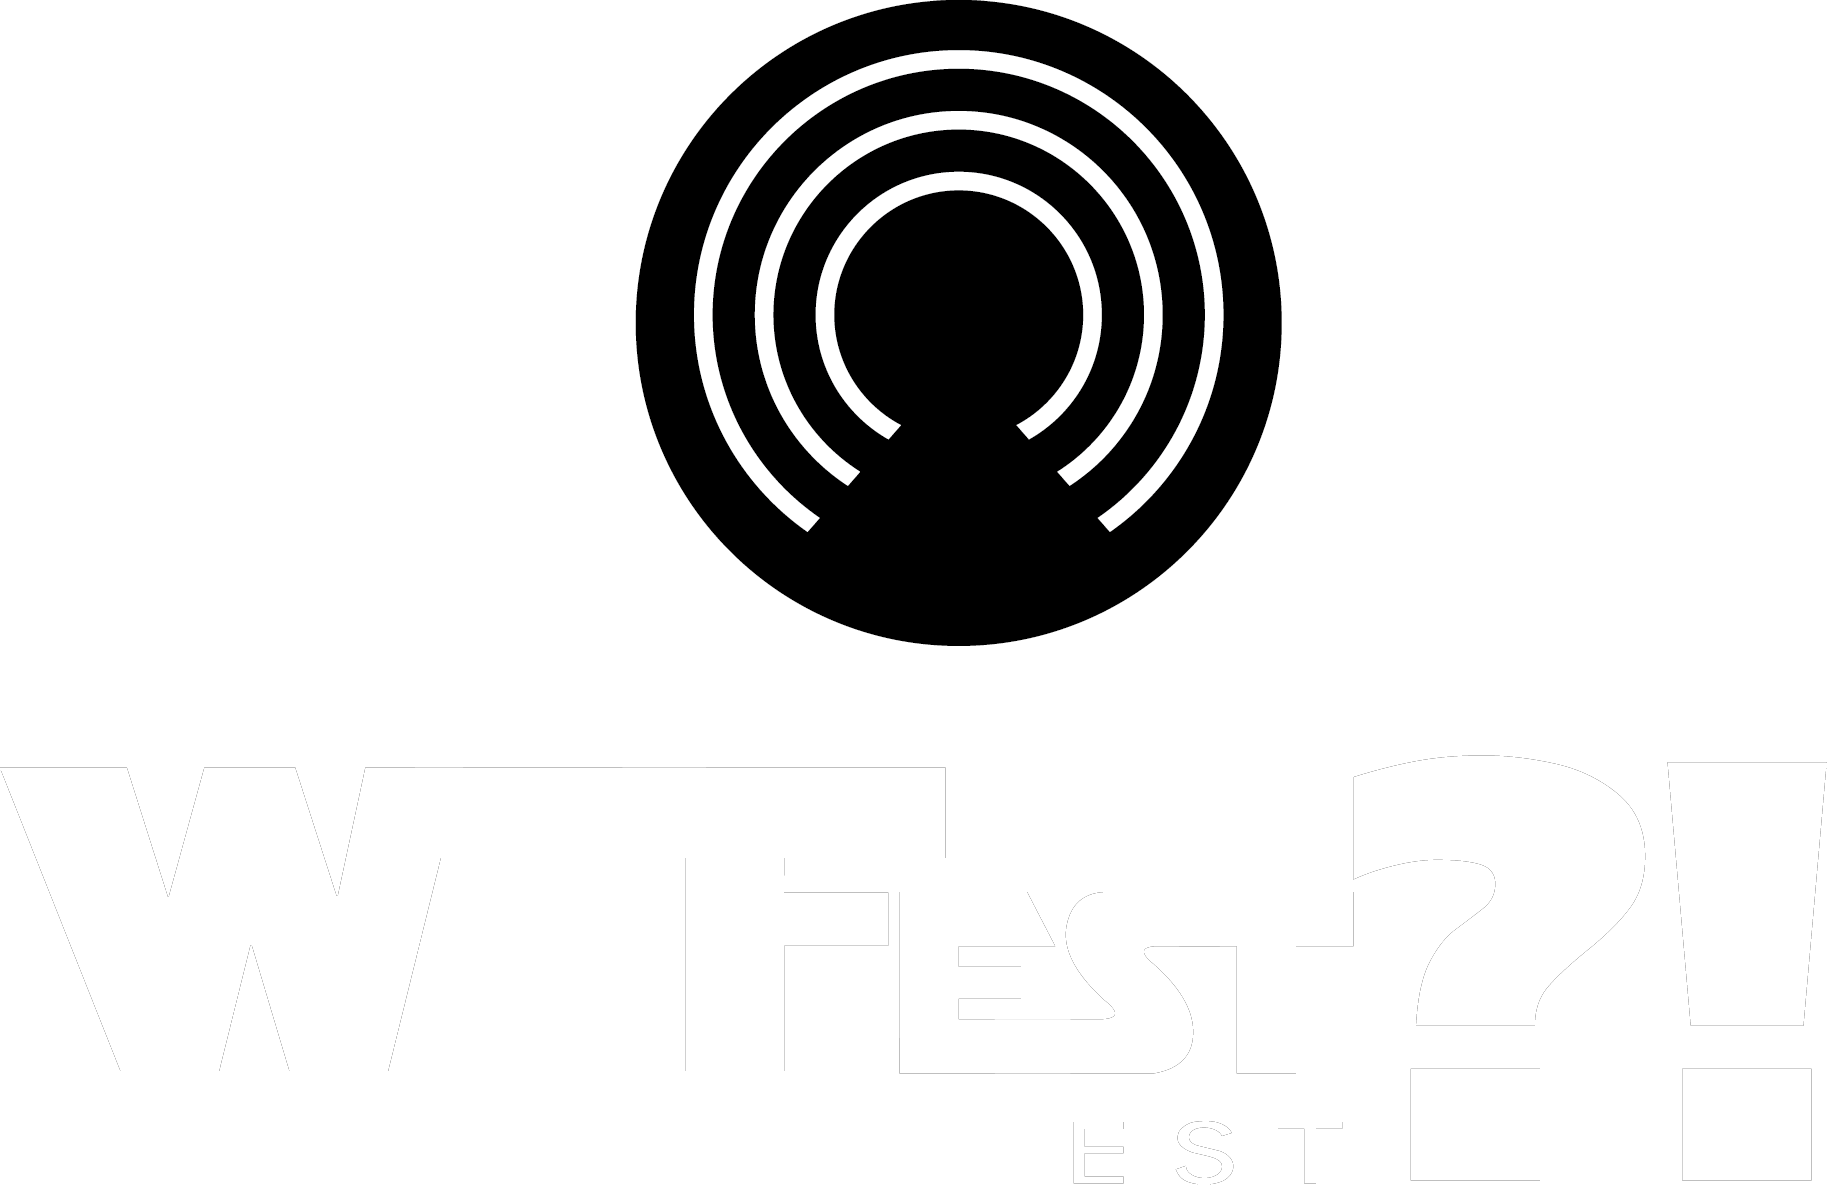 WHAT THE FEST